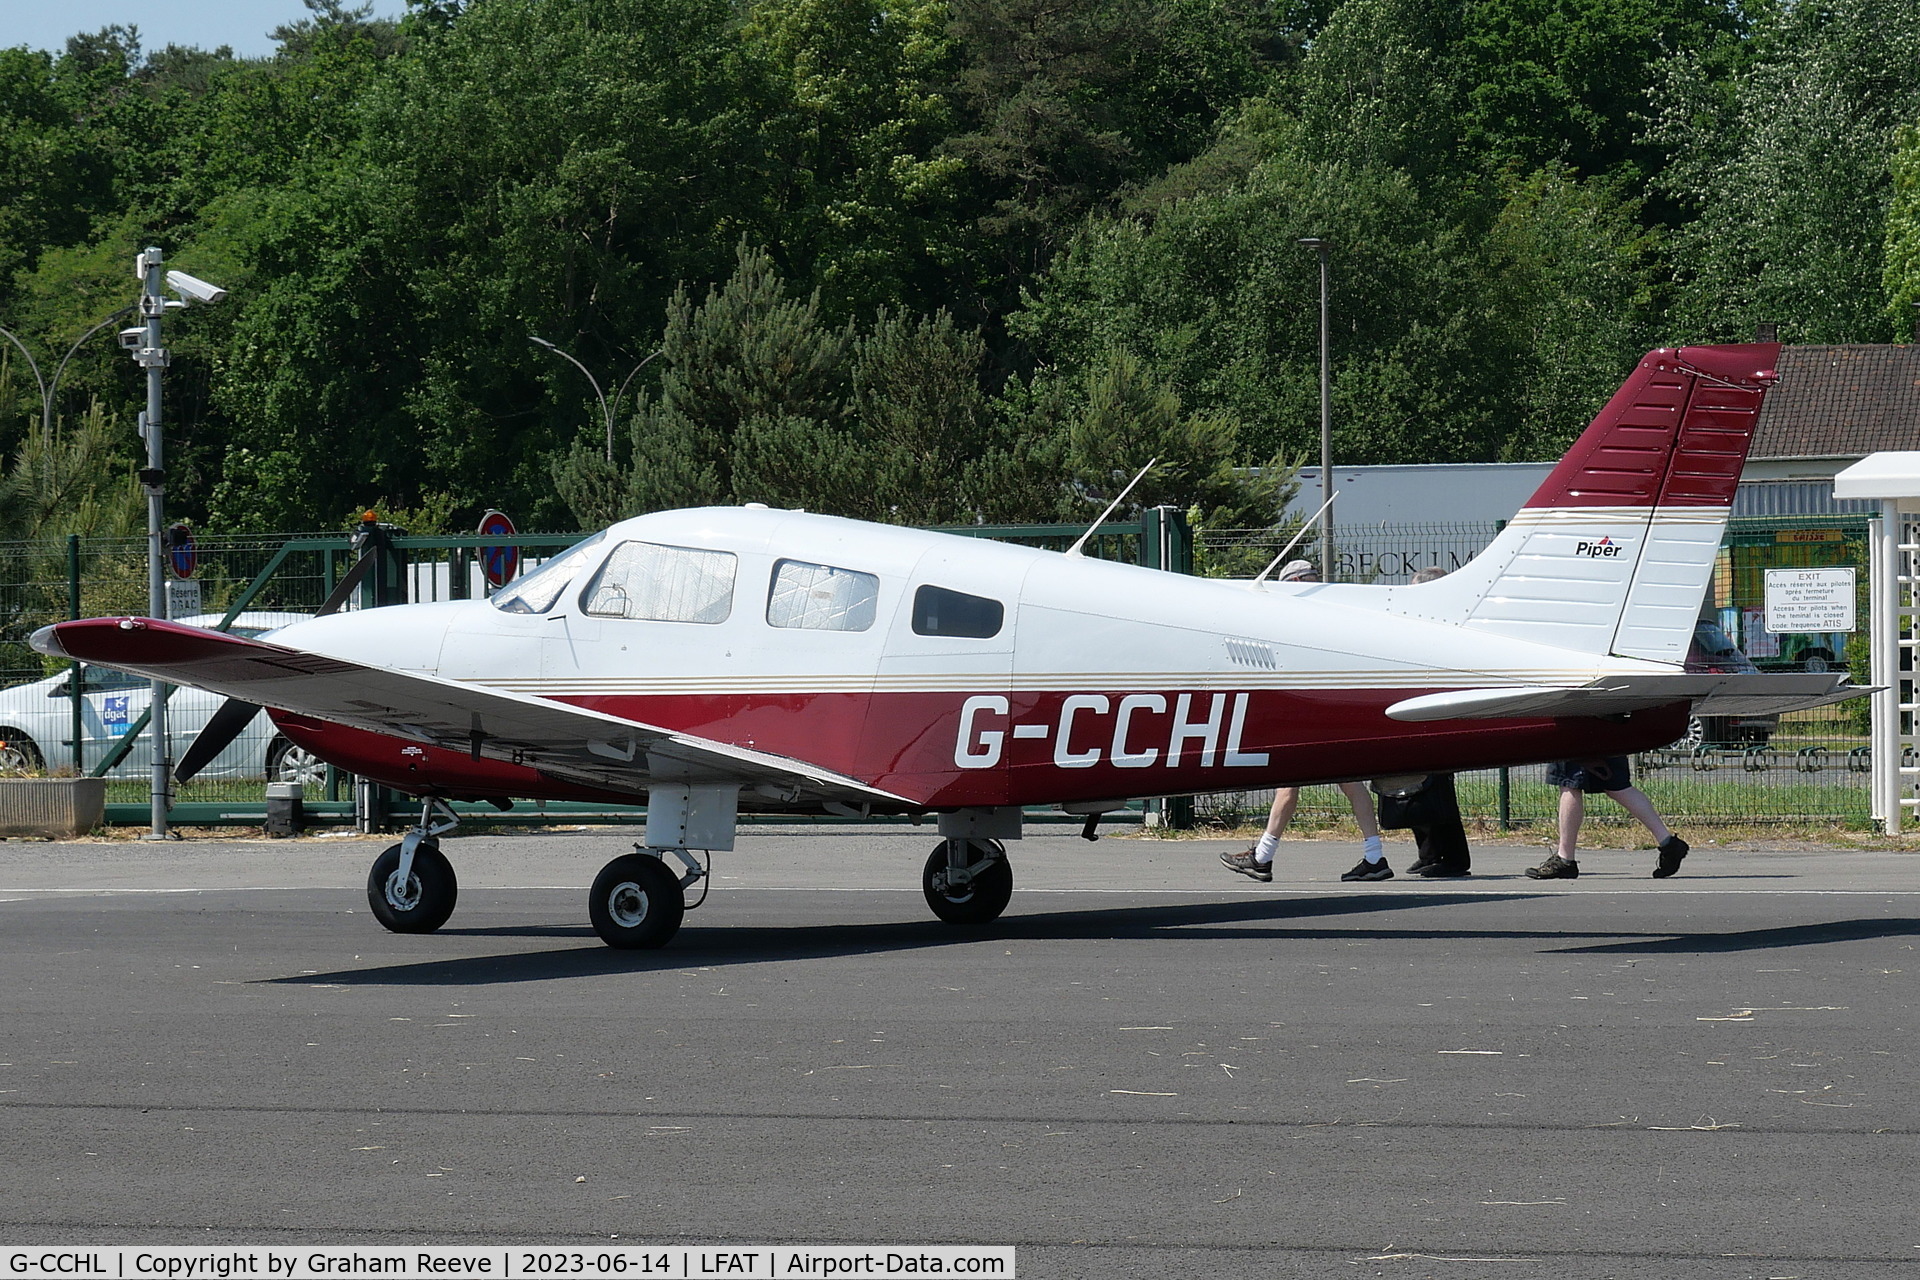 G-CCHL, 1998 Piper PA-28-181 Cherokee Archer III C/N 2843176, Parked at Le Touquet.